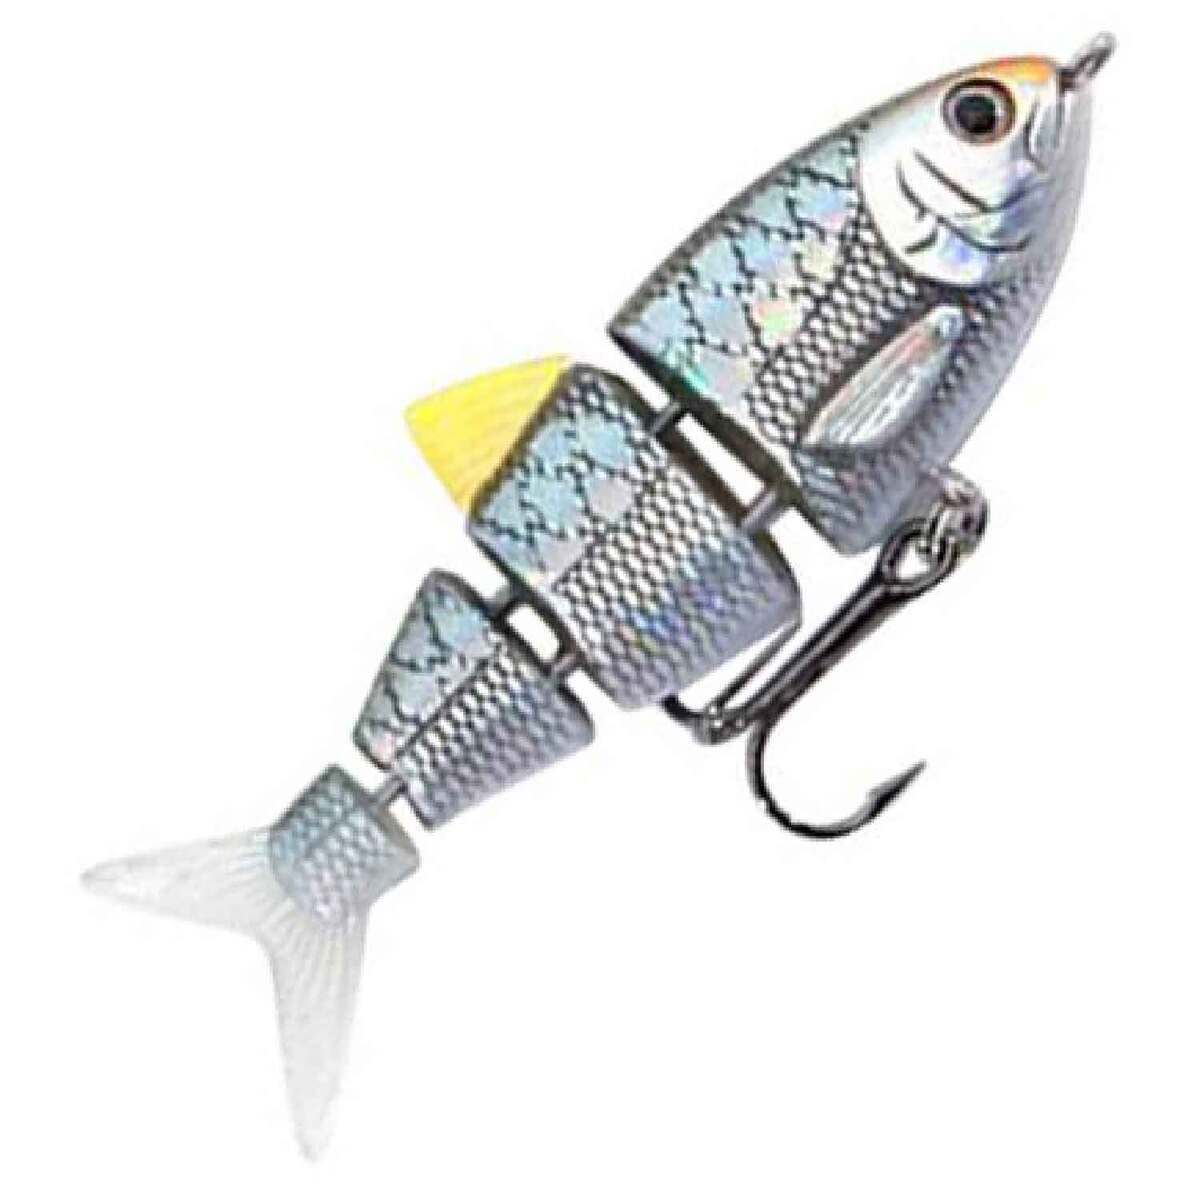 Spro kgb chad shad 180 glide bait in Sporting Goods